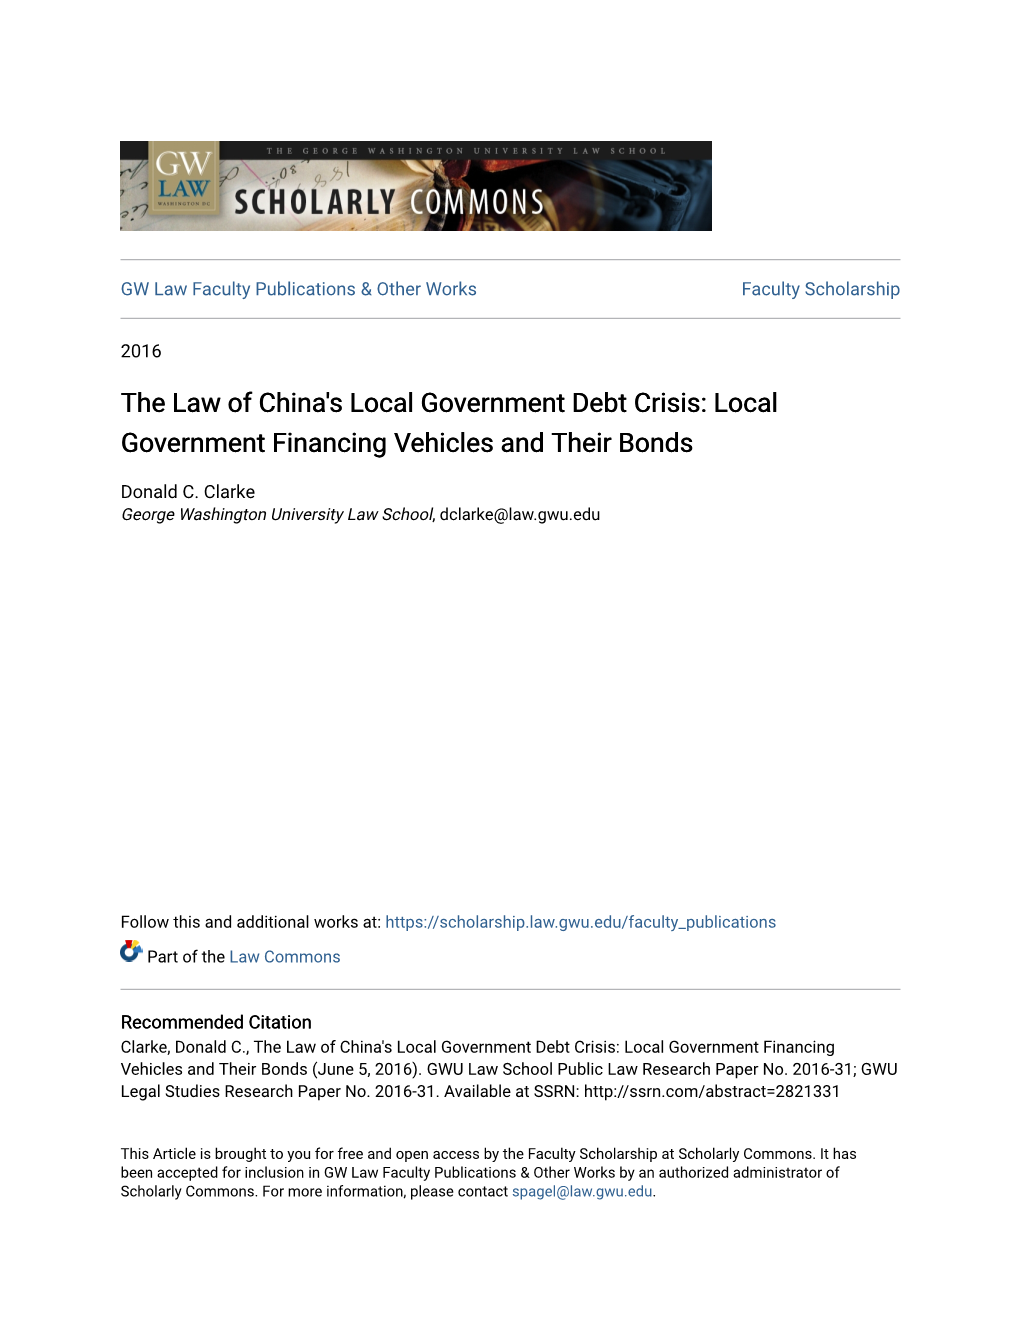 Local Government Financing Vehicles and Their Bonds